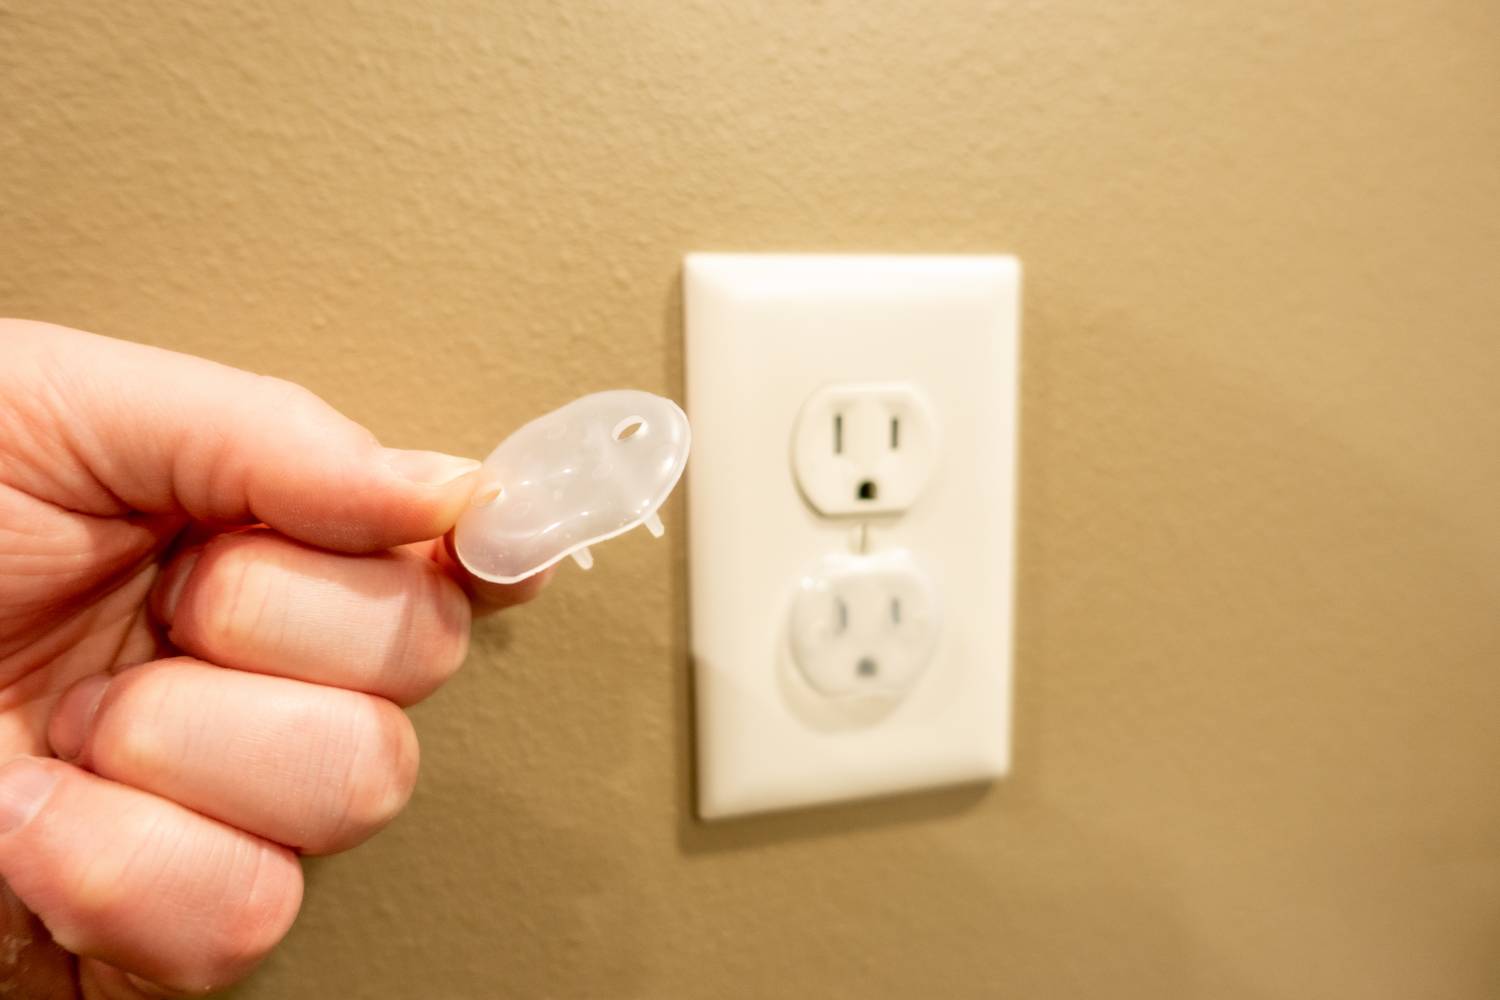 How to childproof extension cords and electrical outlets